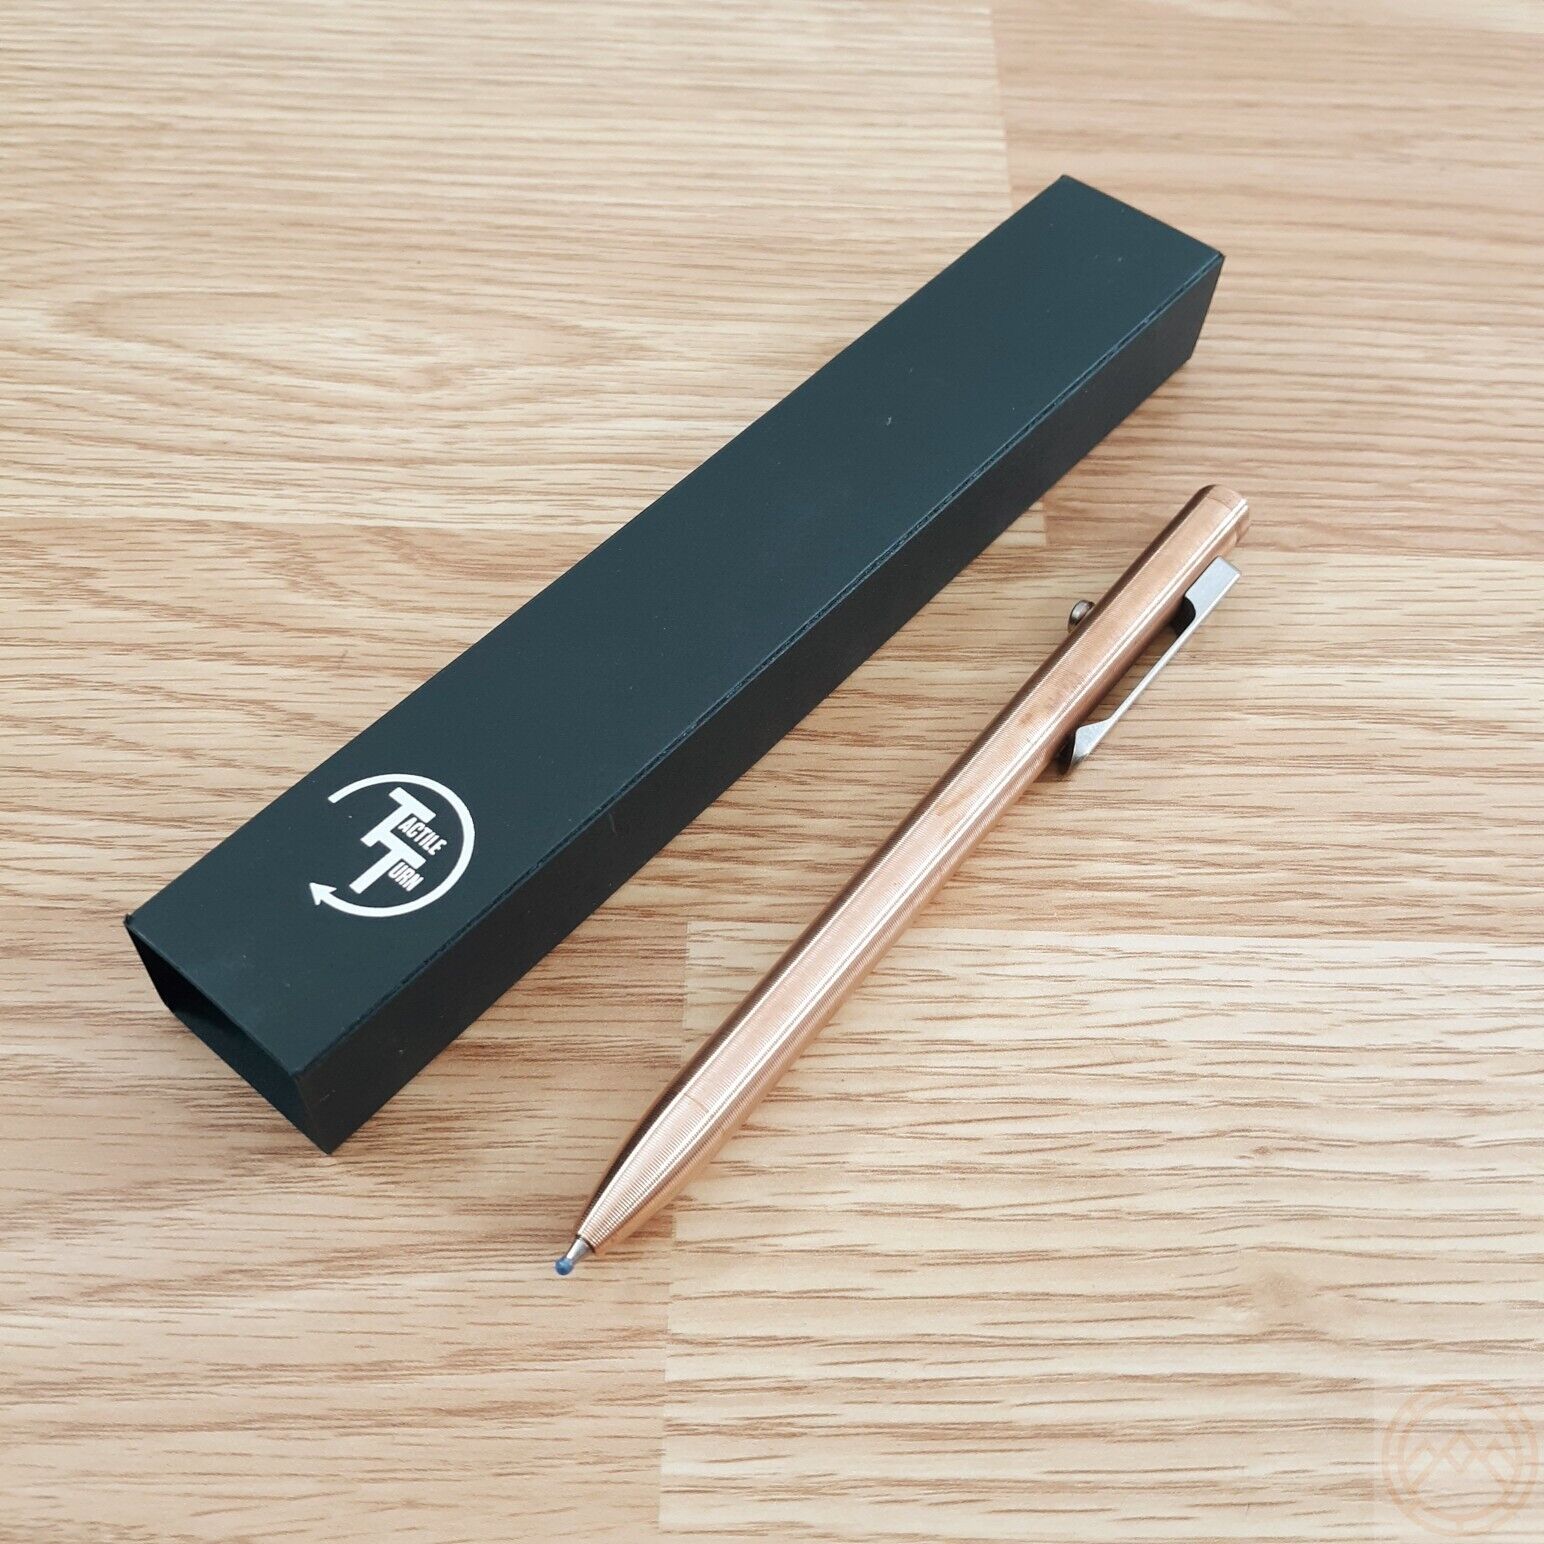 Tactile Turn Slim Bolt Action Pen Standard Machined From Copper w/ Pocket Clip